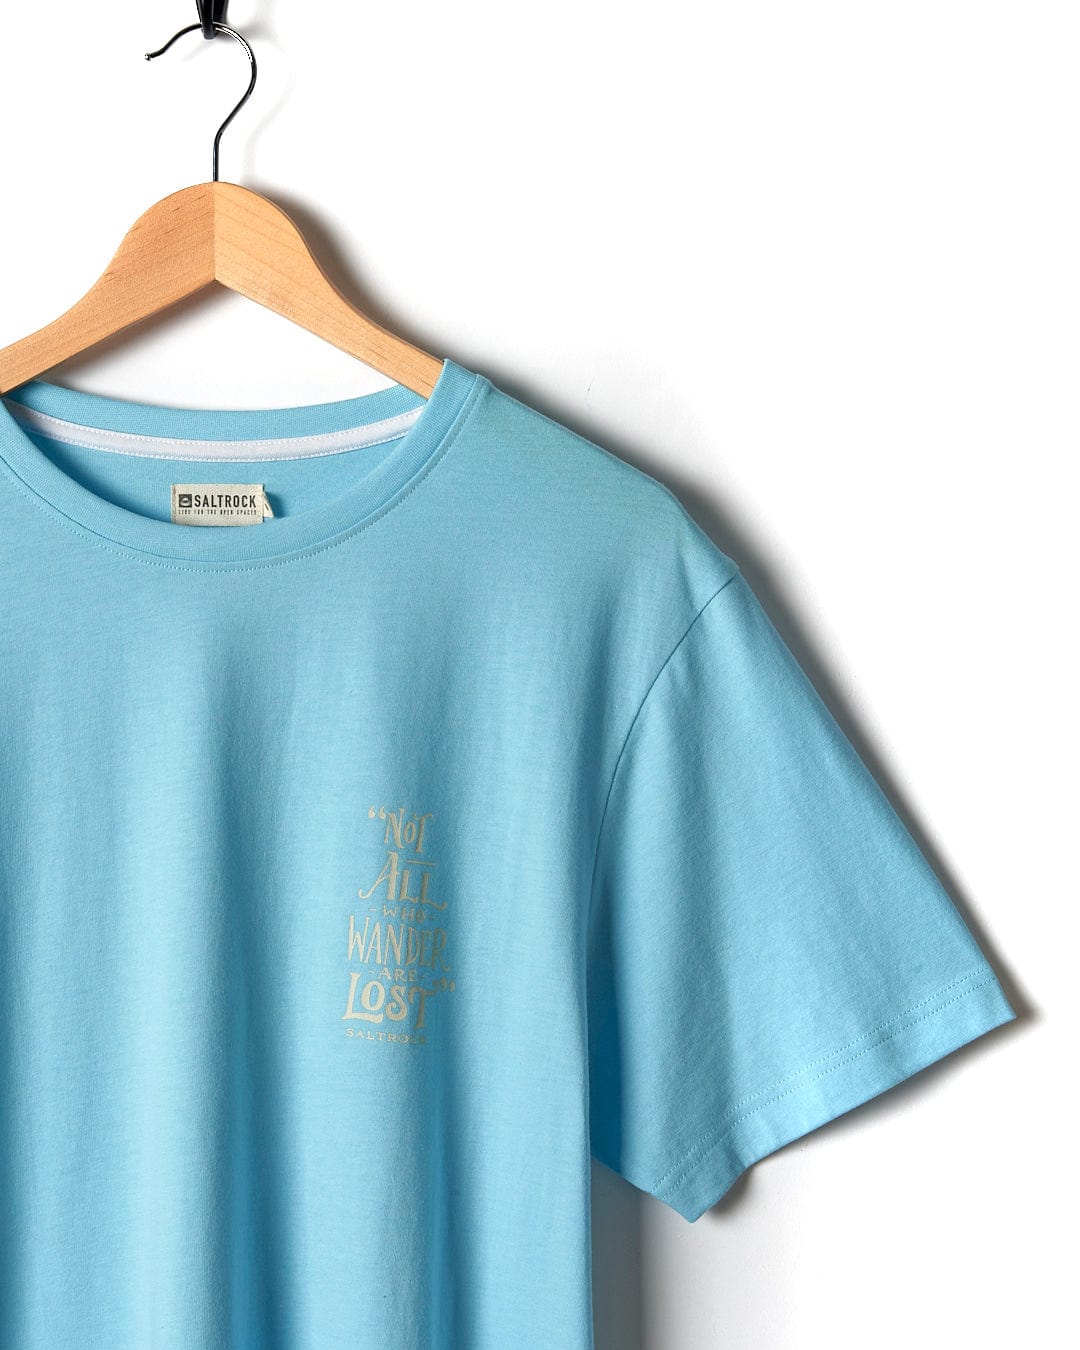 A Lost Ships - Mens Short Sleeve T-Shirt - Light Blue with a gold logo on it.